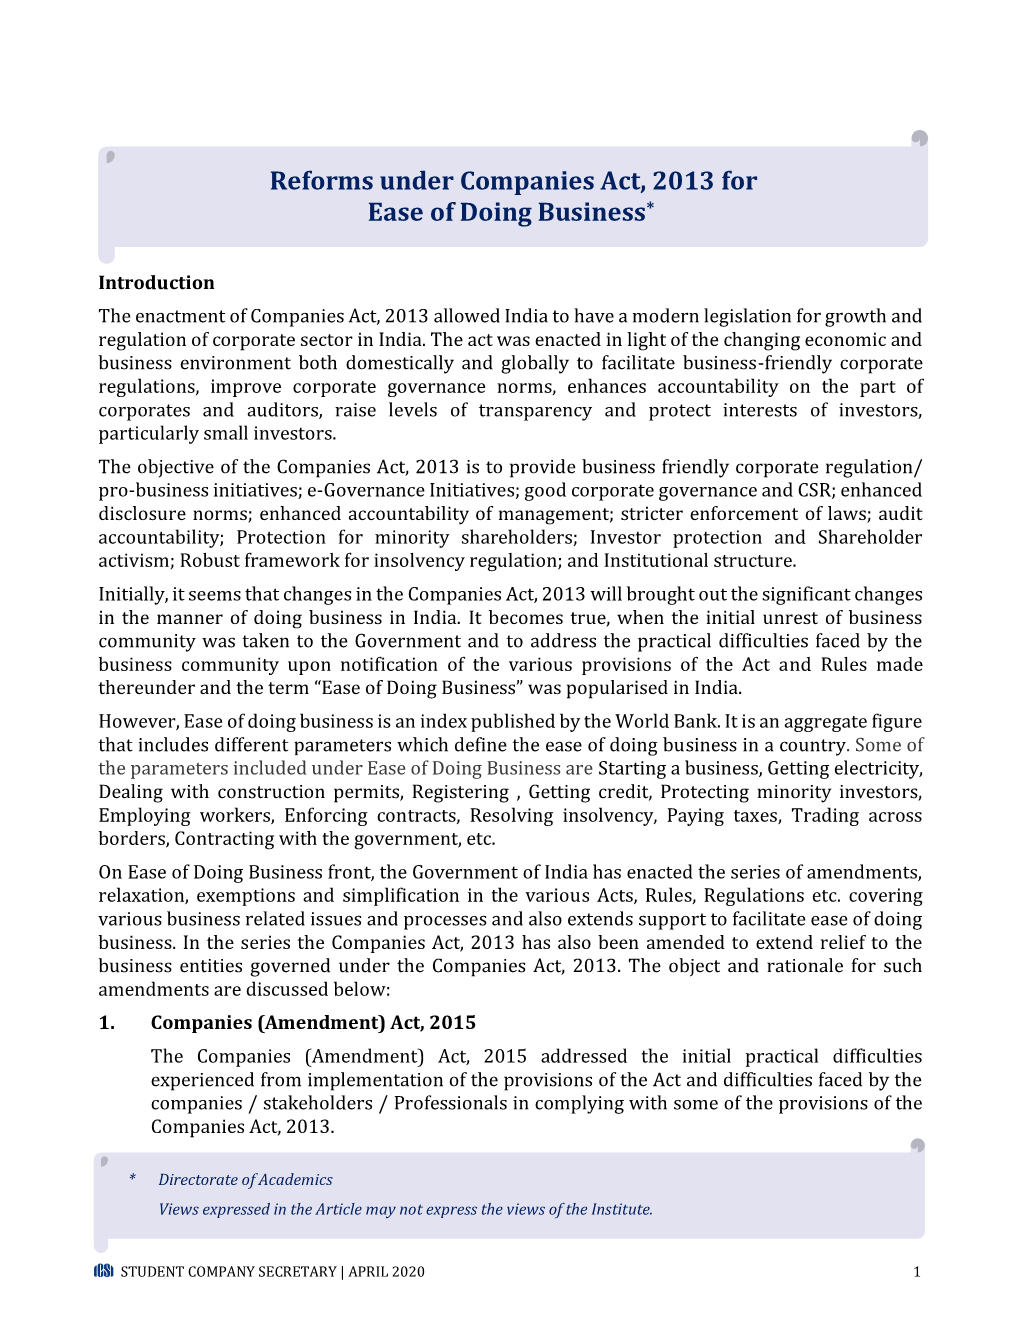 Reforms Under Companies Act, 2013 for Ease of Doing Business*